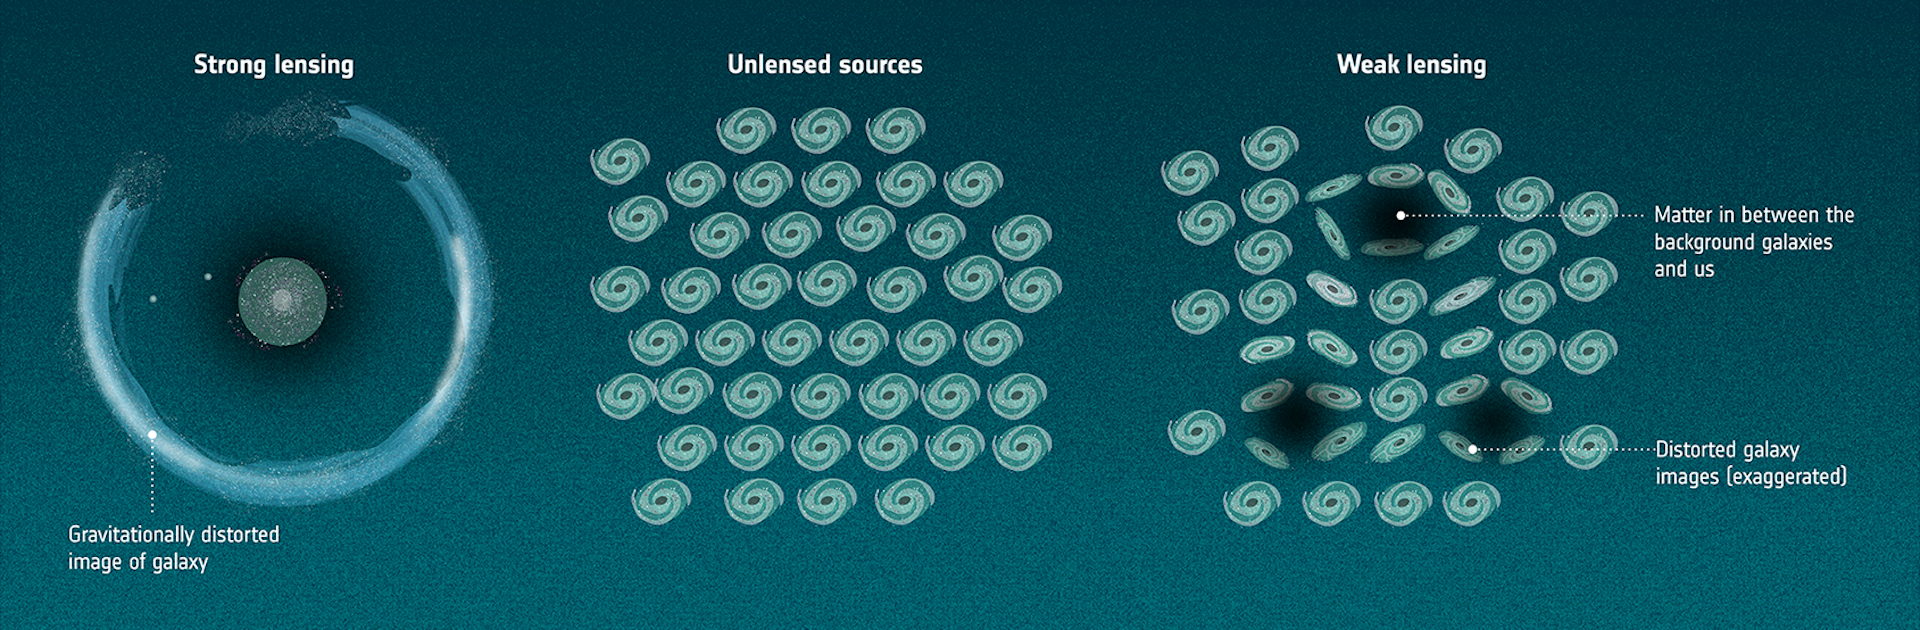 A blue/green graphic displays three sections. On the left, 'strong lensing' shows a textured green circle surrounded nearly all around by a blue ring. In the middle, several dozen swirly green galaxy icons in a cluster labeled, 'unlensed sources.' And on the right, 'weak lensing,' the same swirly icons in a cluster, but distorted on the inside of the cluster by three black smudges.